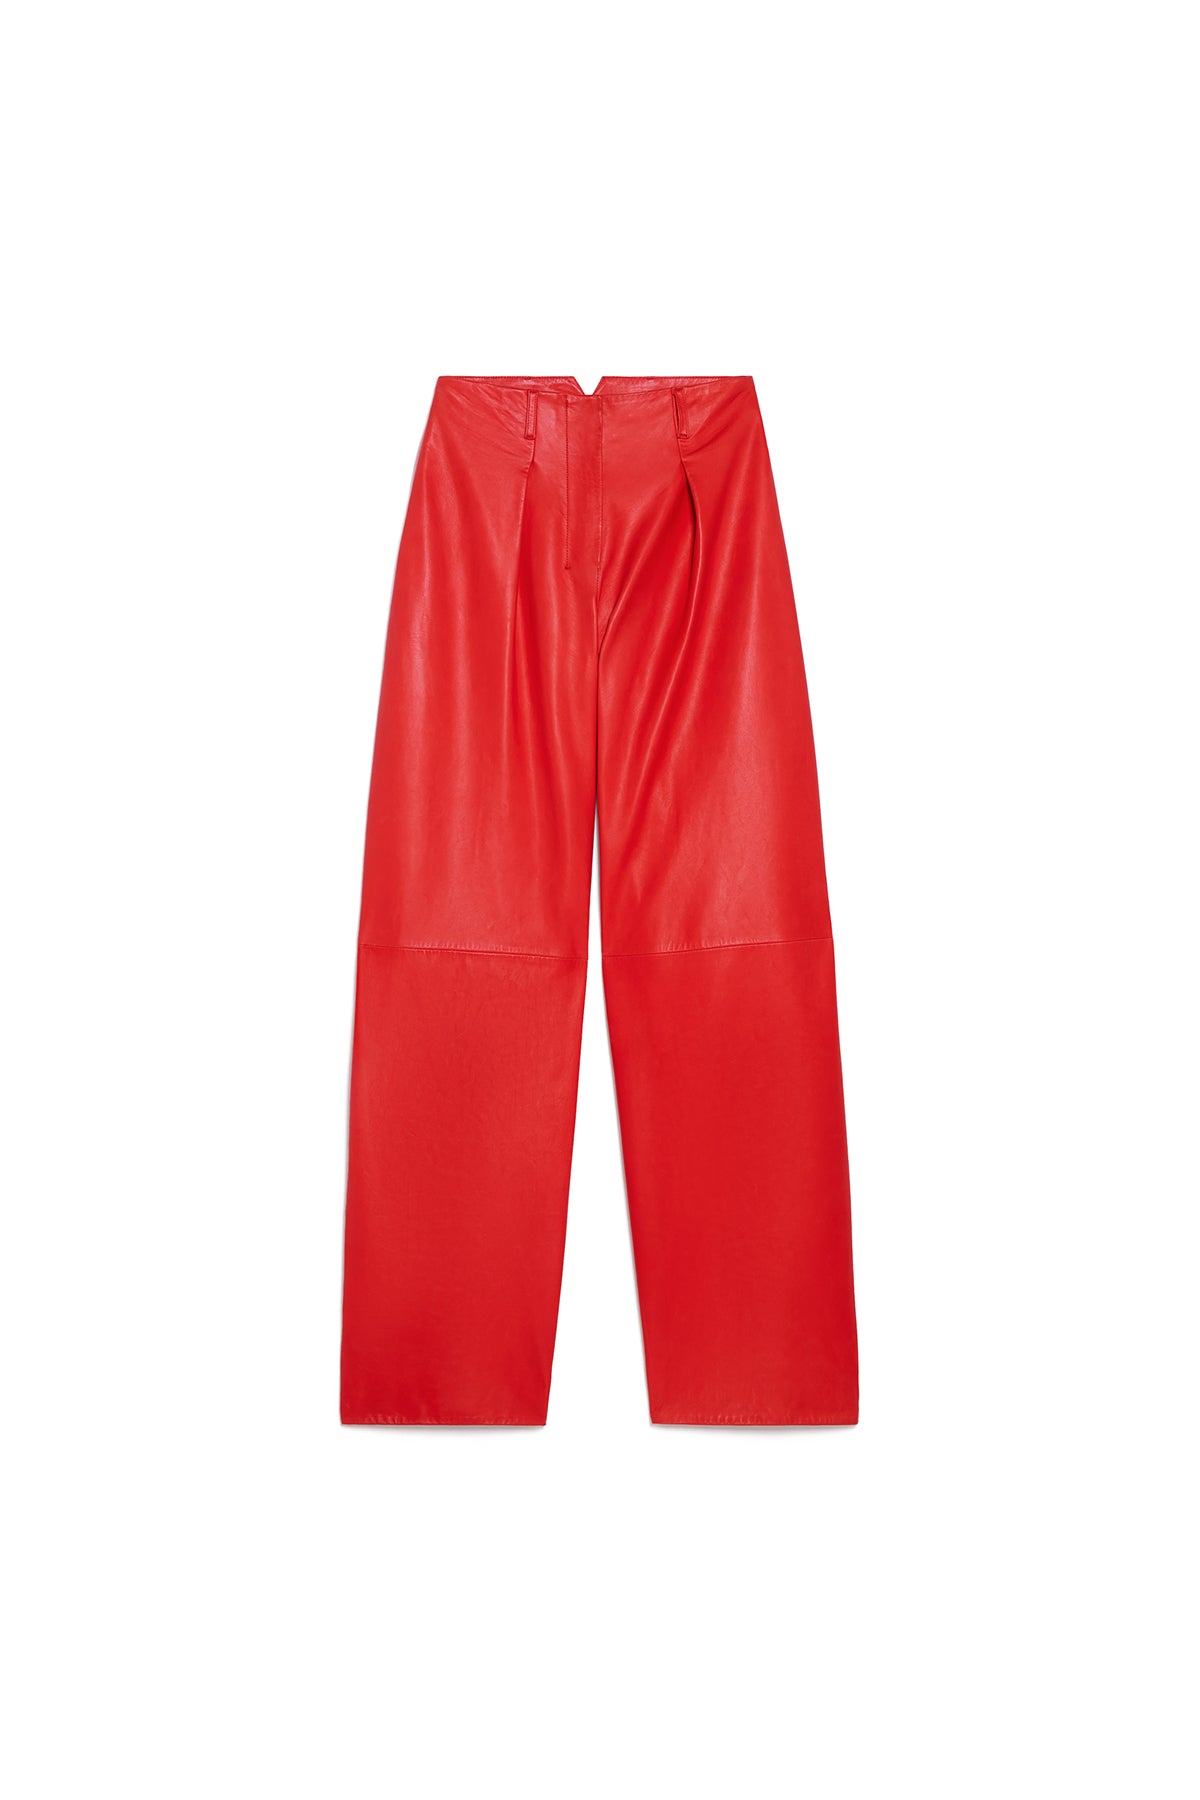 JACQUEMUS | OVALO LEATHER PANTS